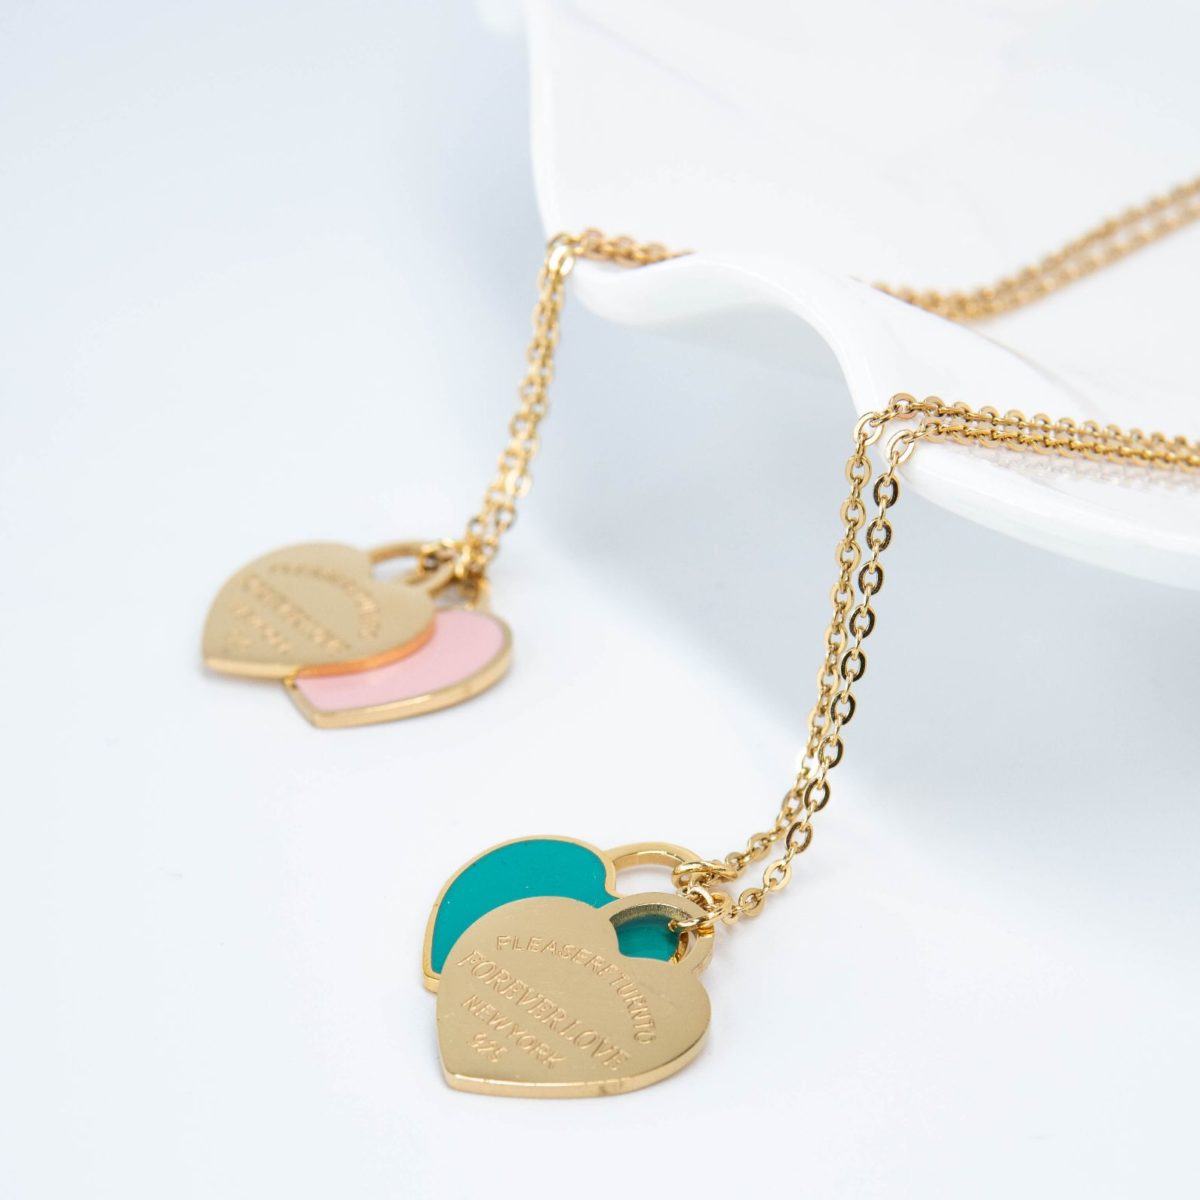 https://m.clubbella.co/product/theresa-gold-turquoise-enamel-necklace/ Theresa Necklace - Turquioise Gold (2)